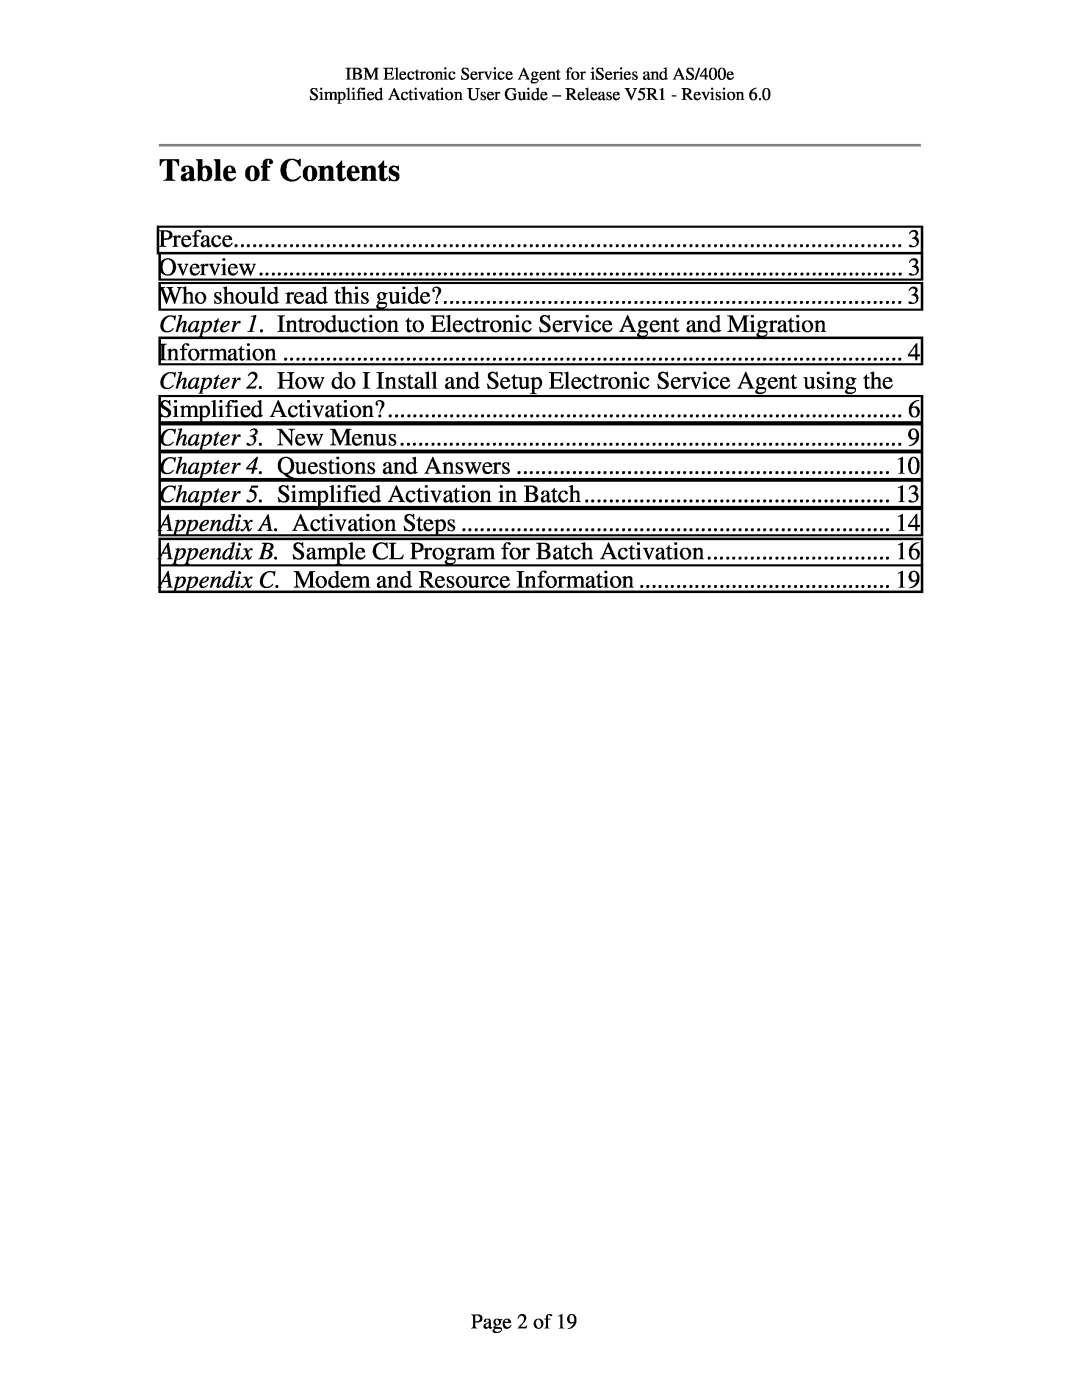 IBM PTF SF67624, iSeries, V5R1 manual Table of Contents, Chapter 